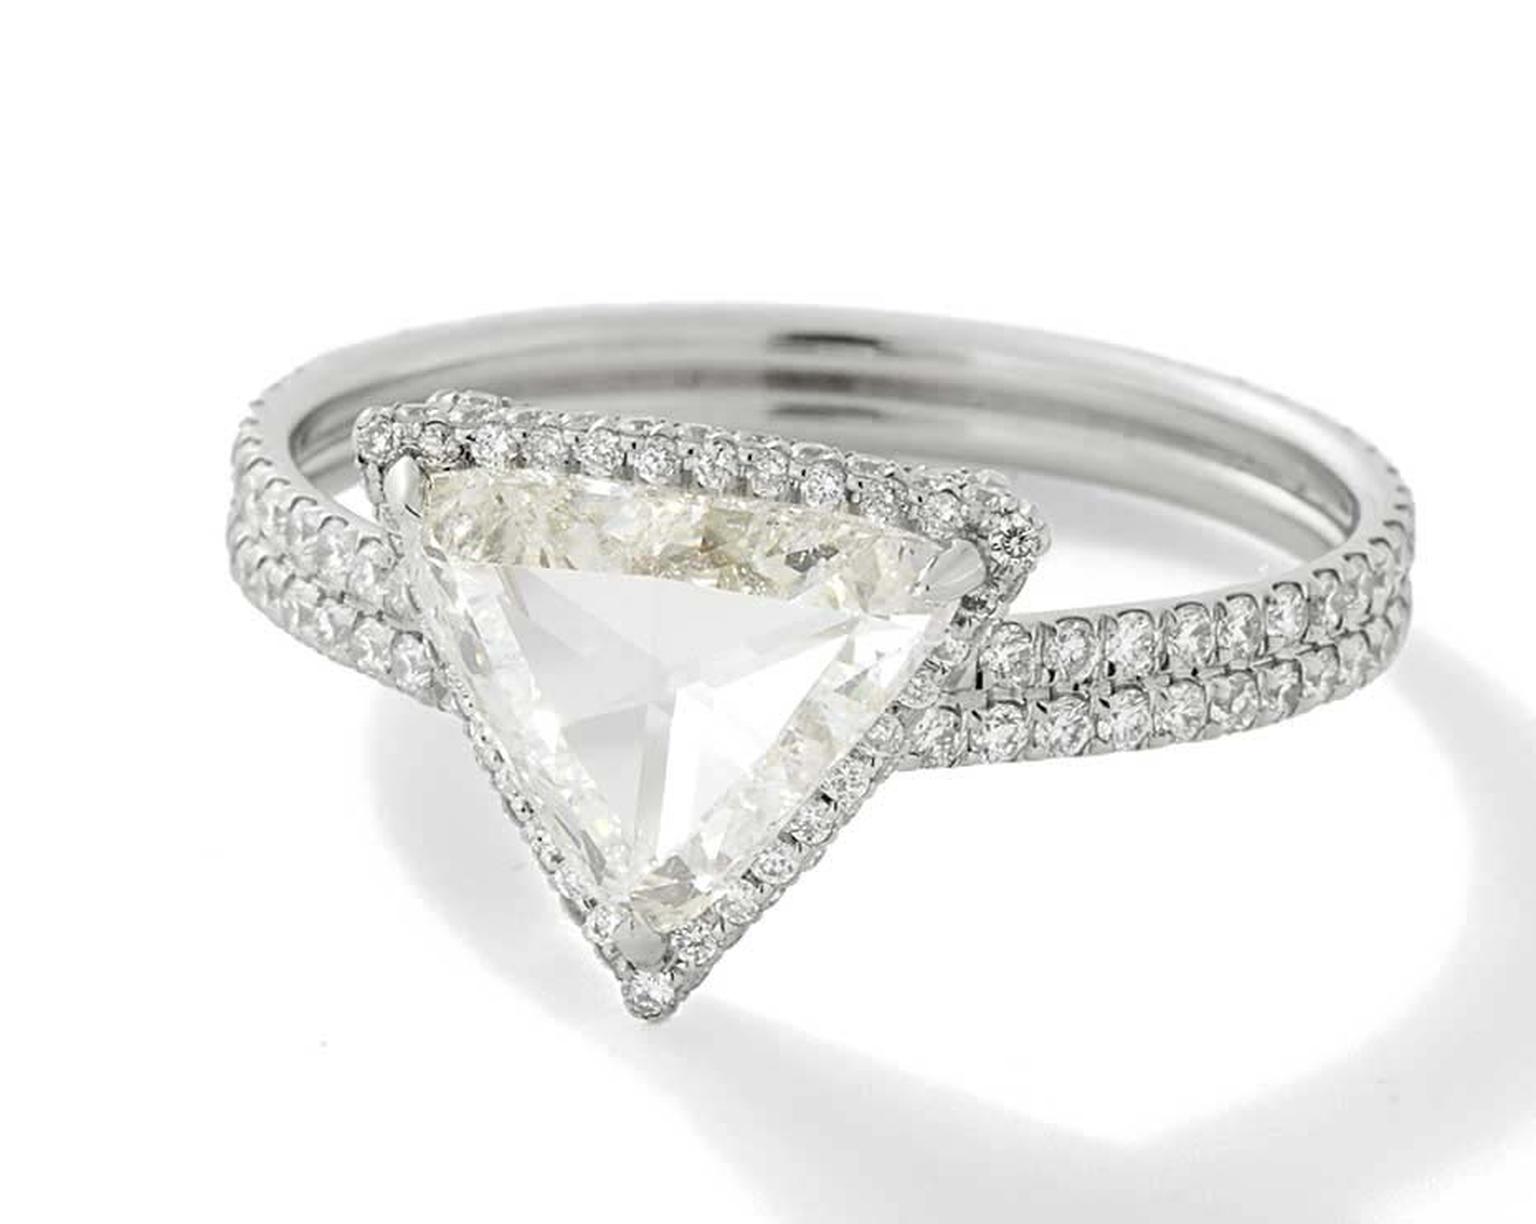 Monique Péan Mineraux collection rose-cut diamond engagement ring with white diamond pavé in recycled platinum (£27,209).